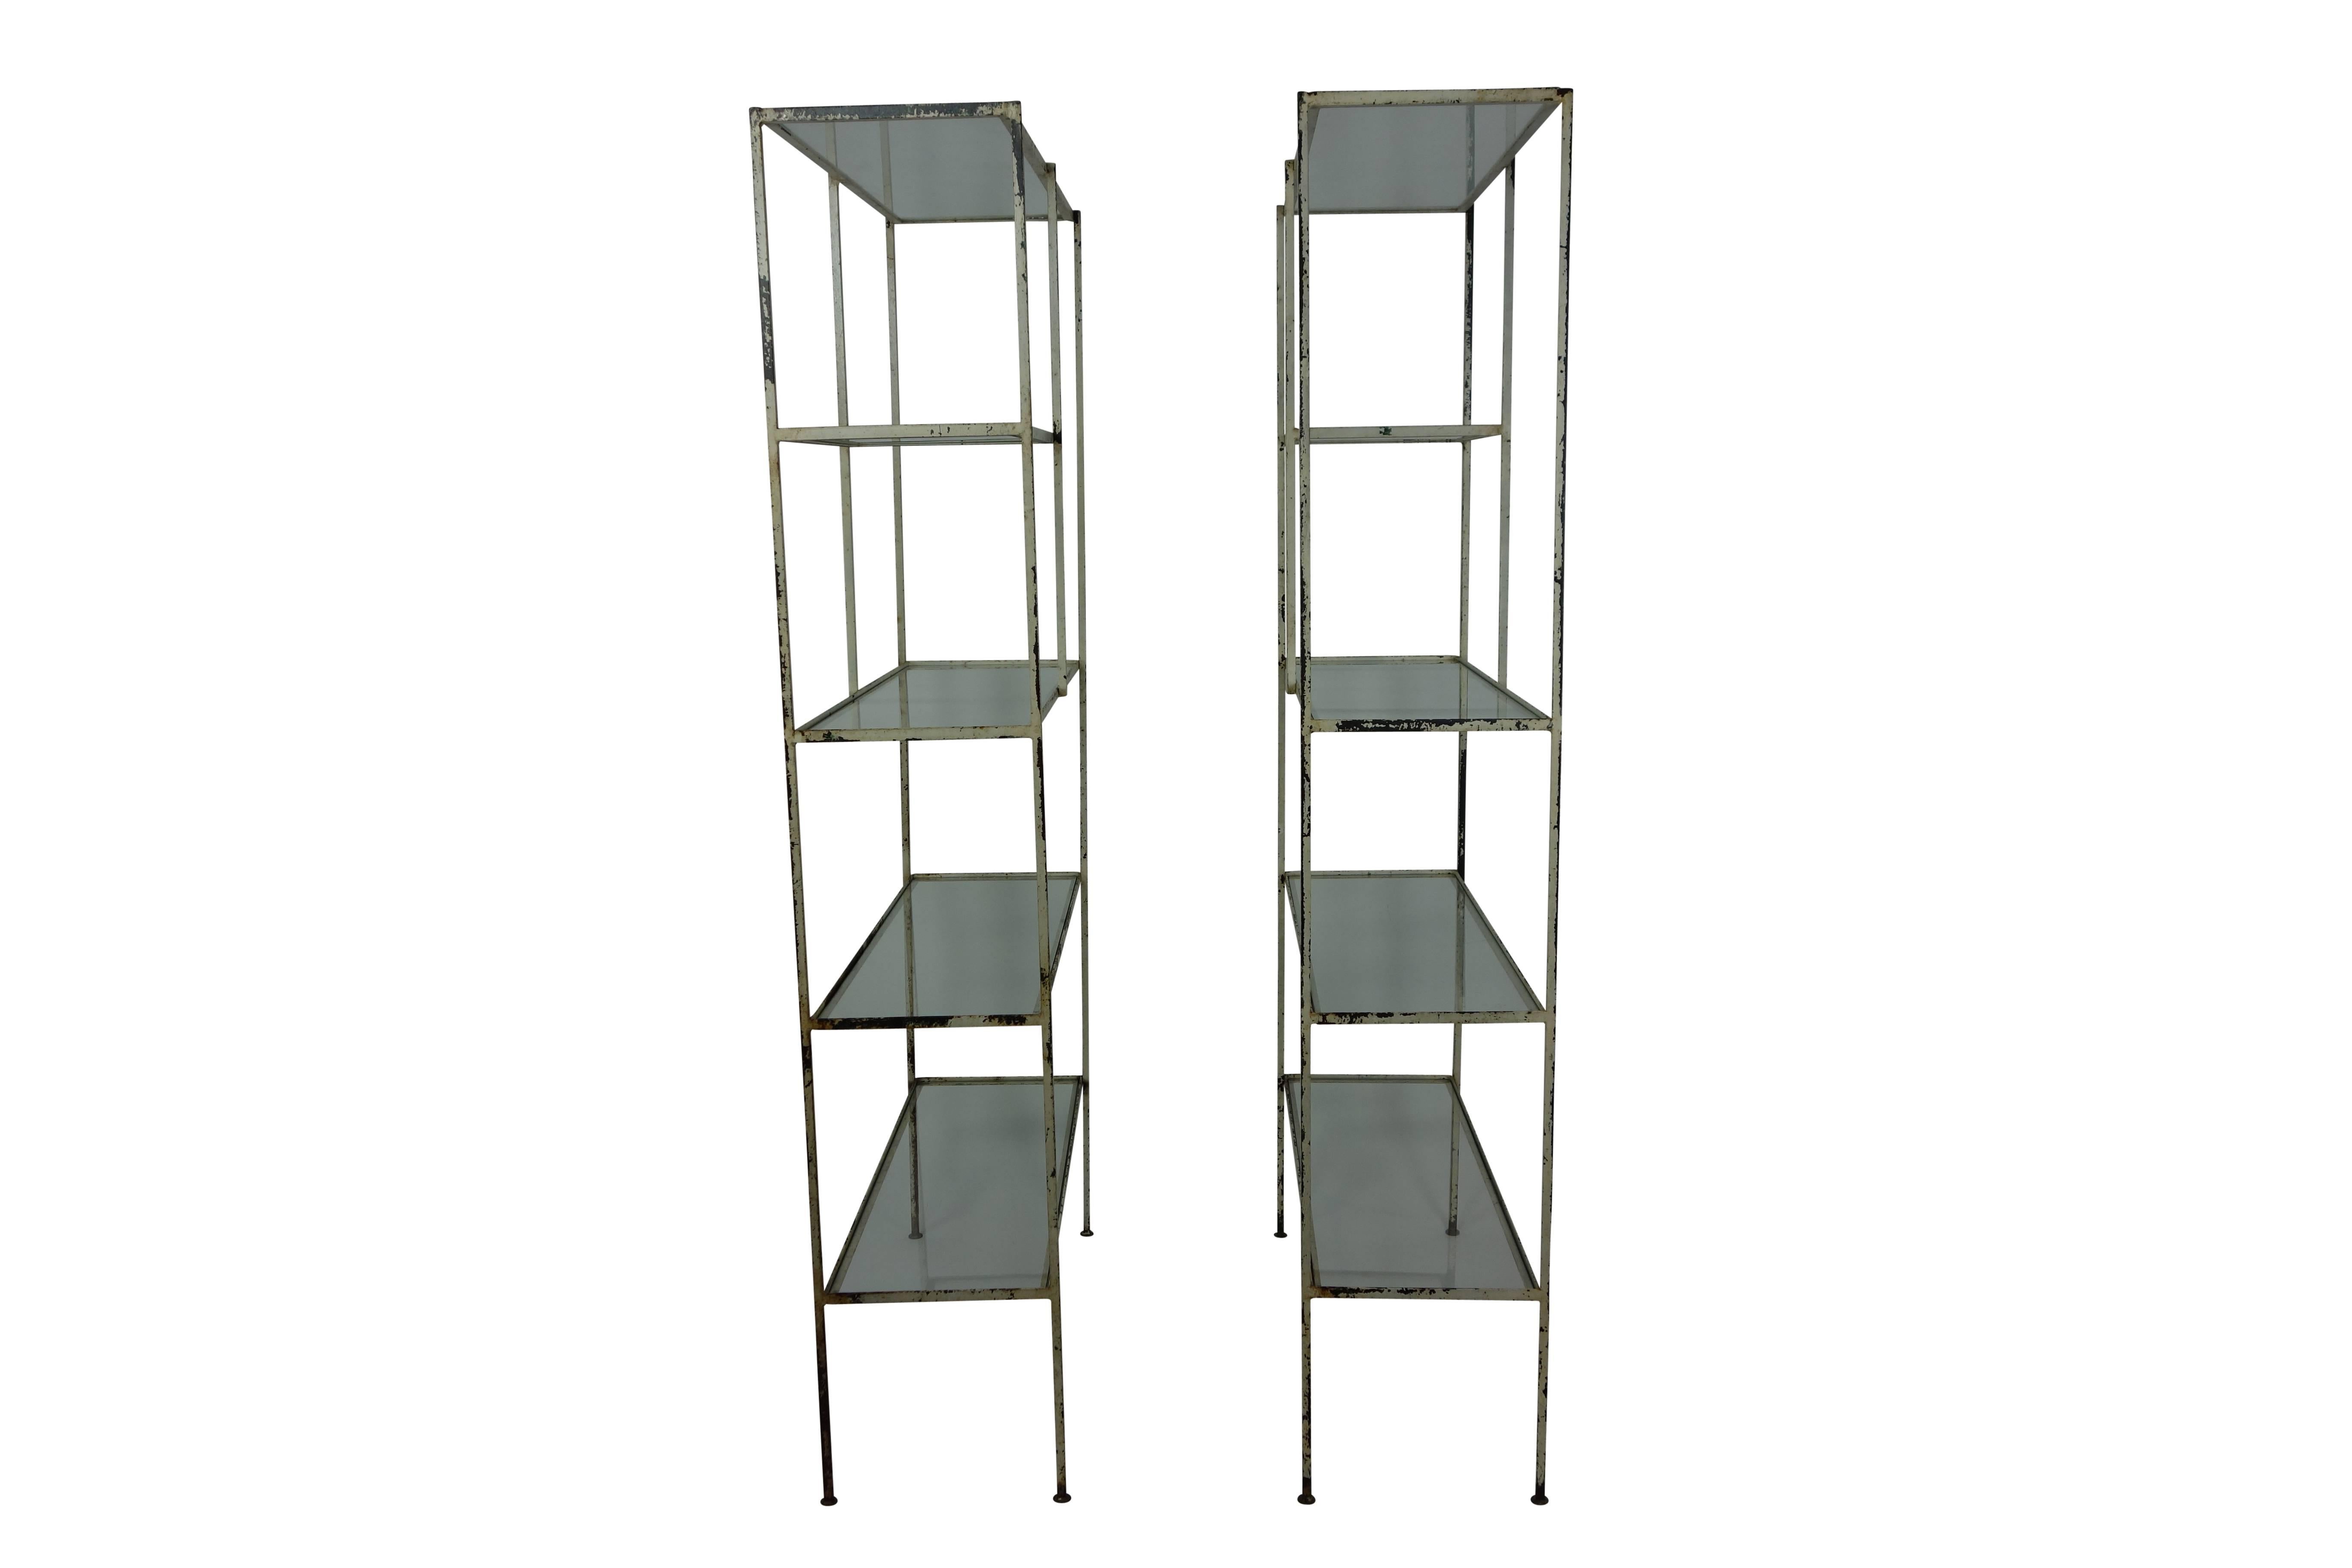 These are a wonderful pair of bookshelves with painted white steel frames and original glass shelves, circa 1940. Under the white paint you can see the slightest hint of the color green it was once painted with.